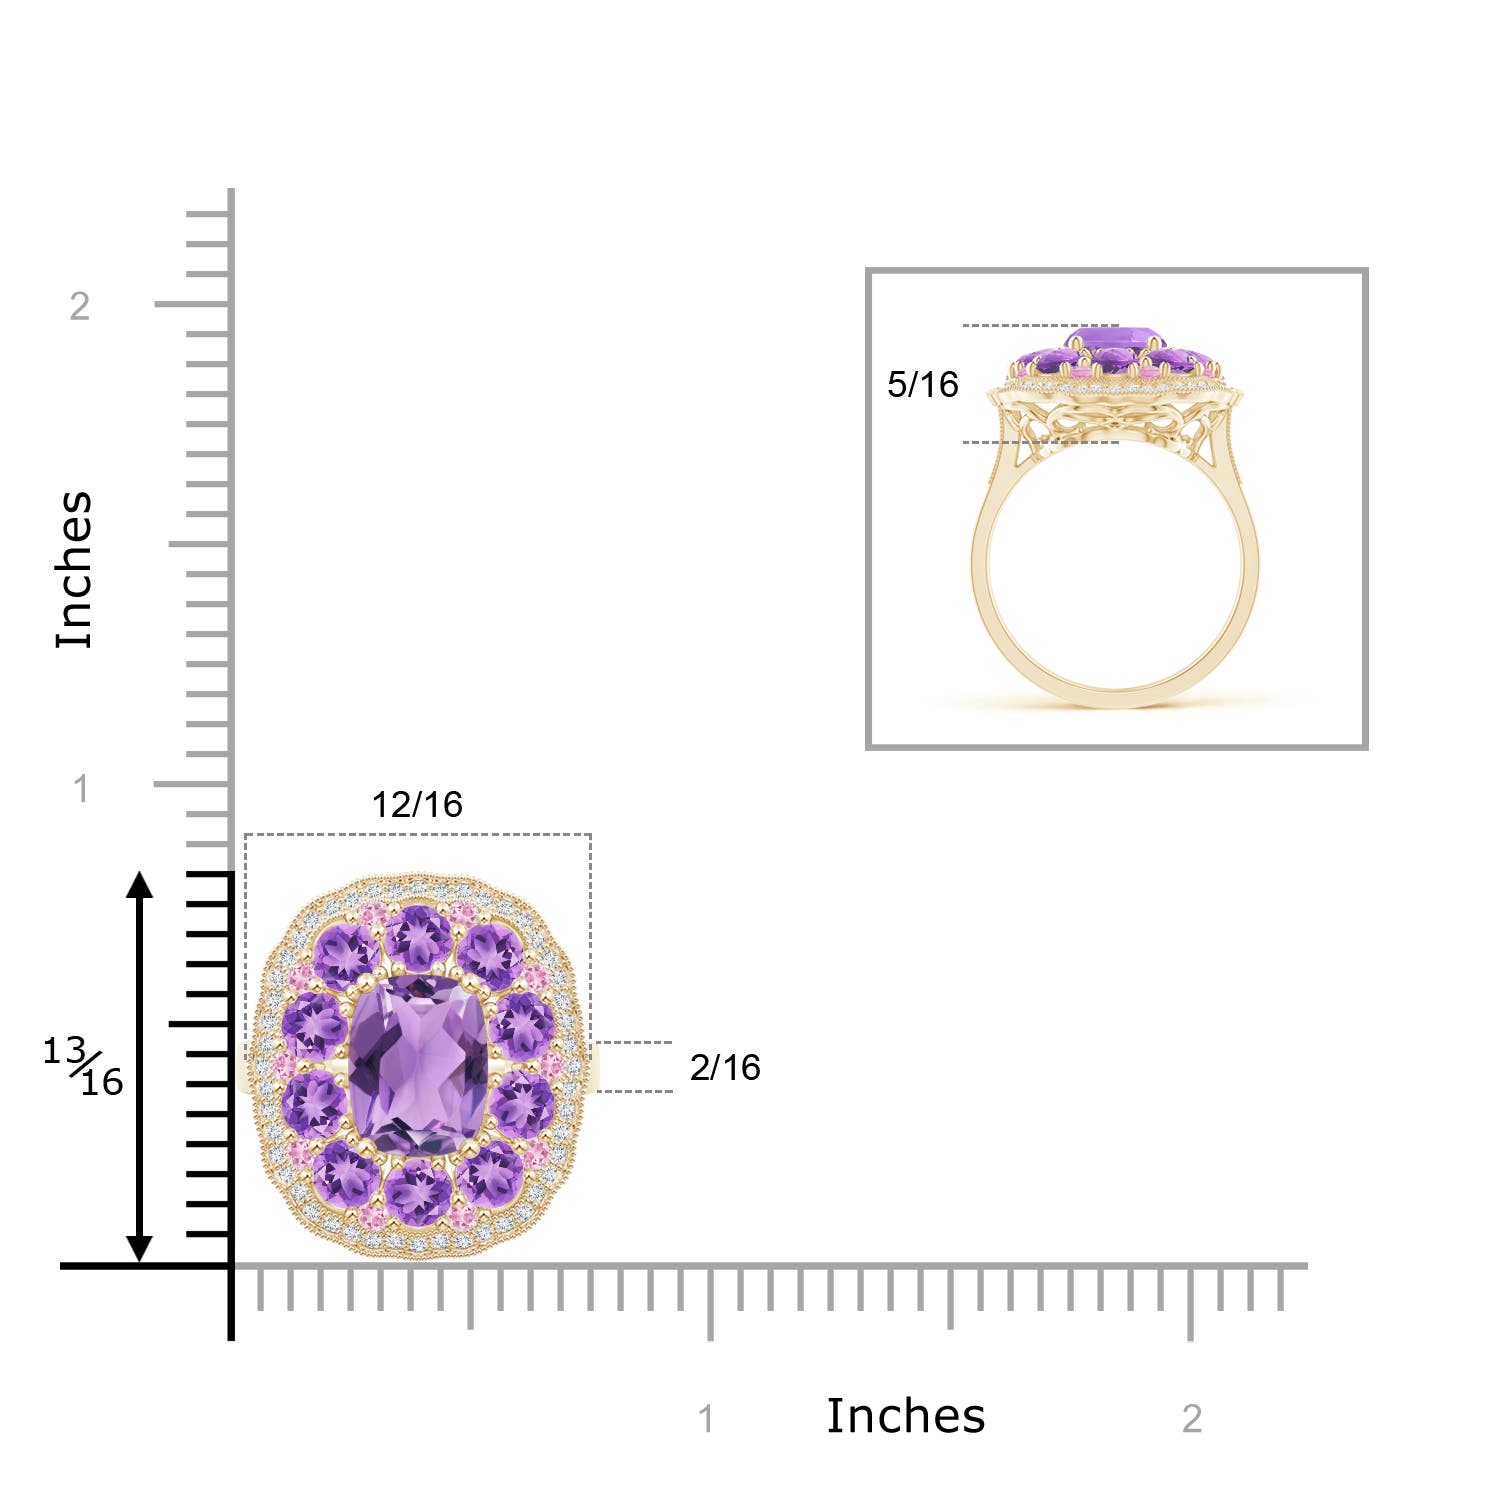 A - Amethyst / 4.12 CT / 14 KT Yellow Gold